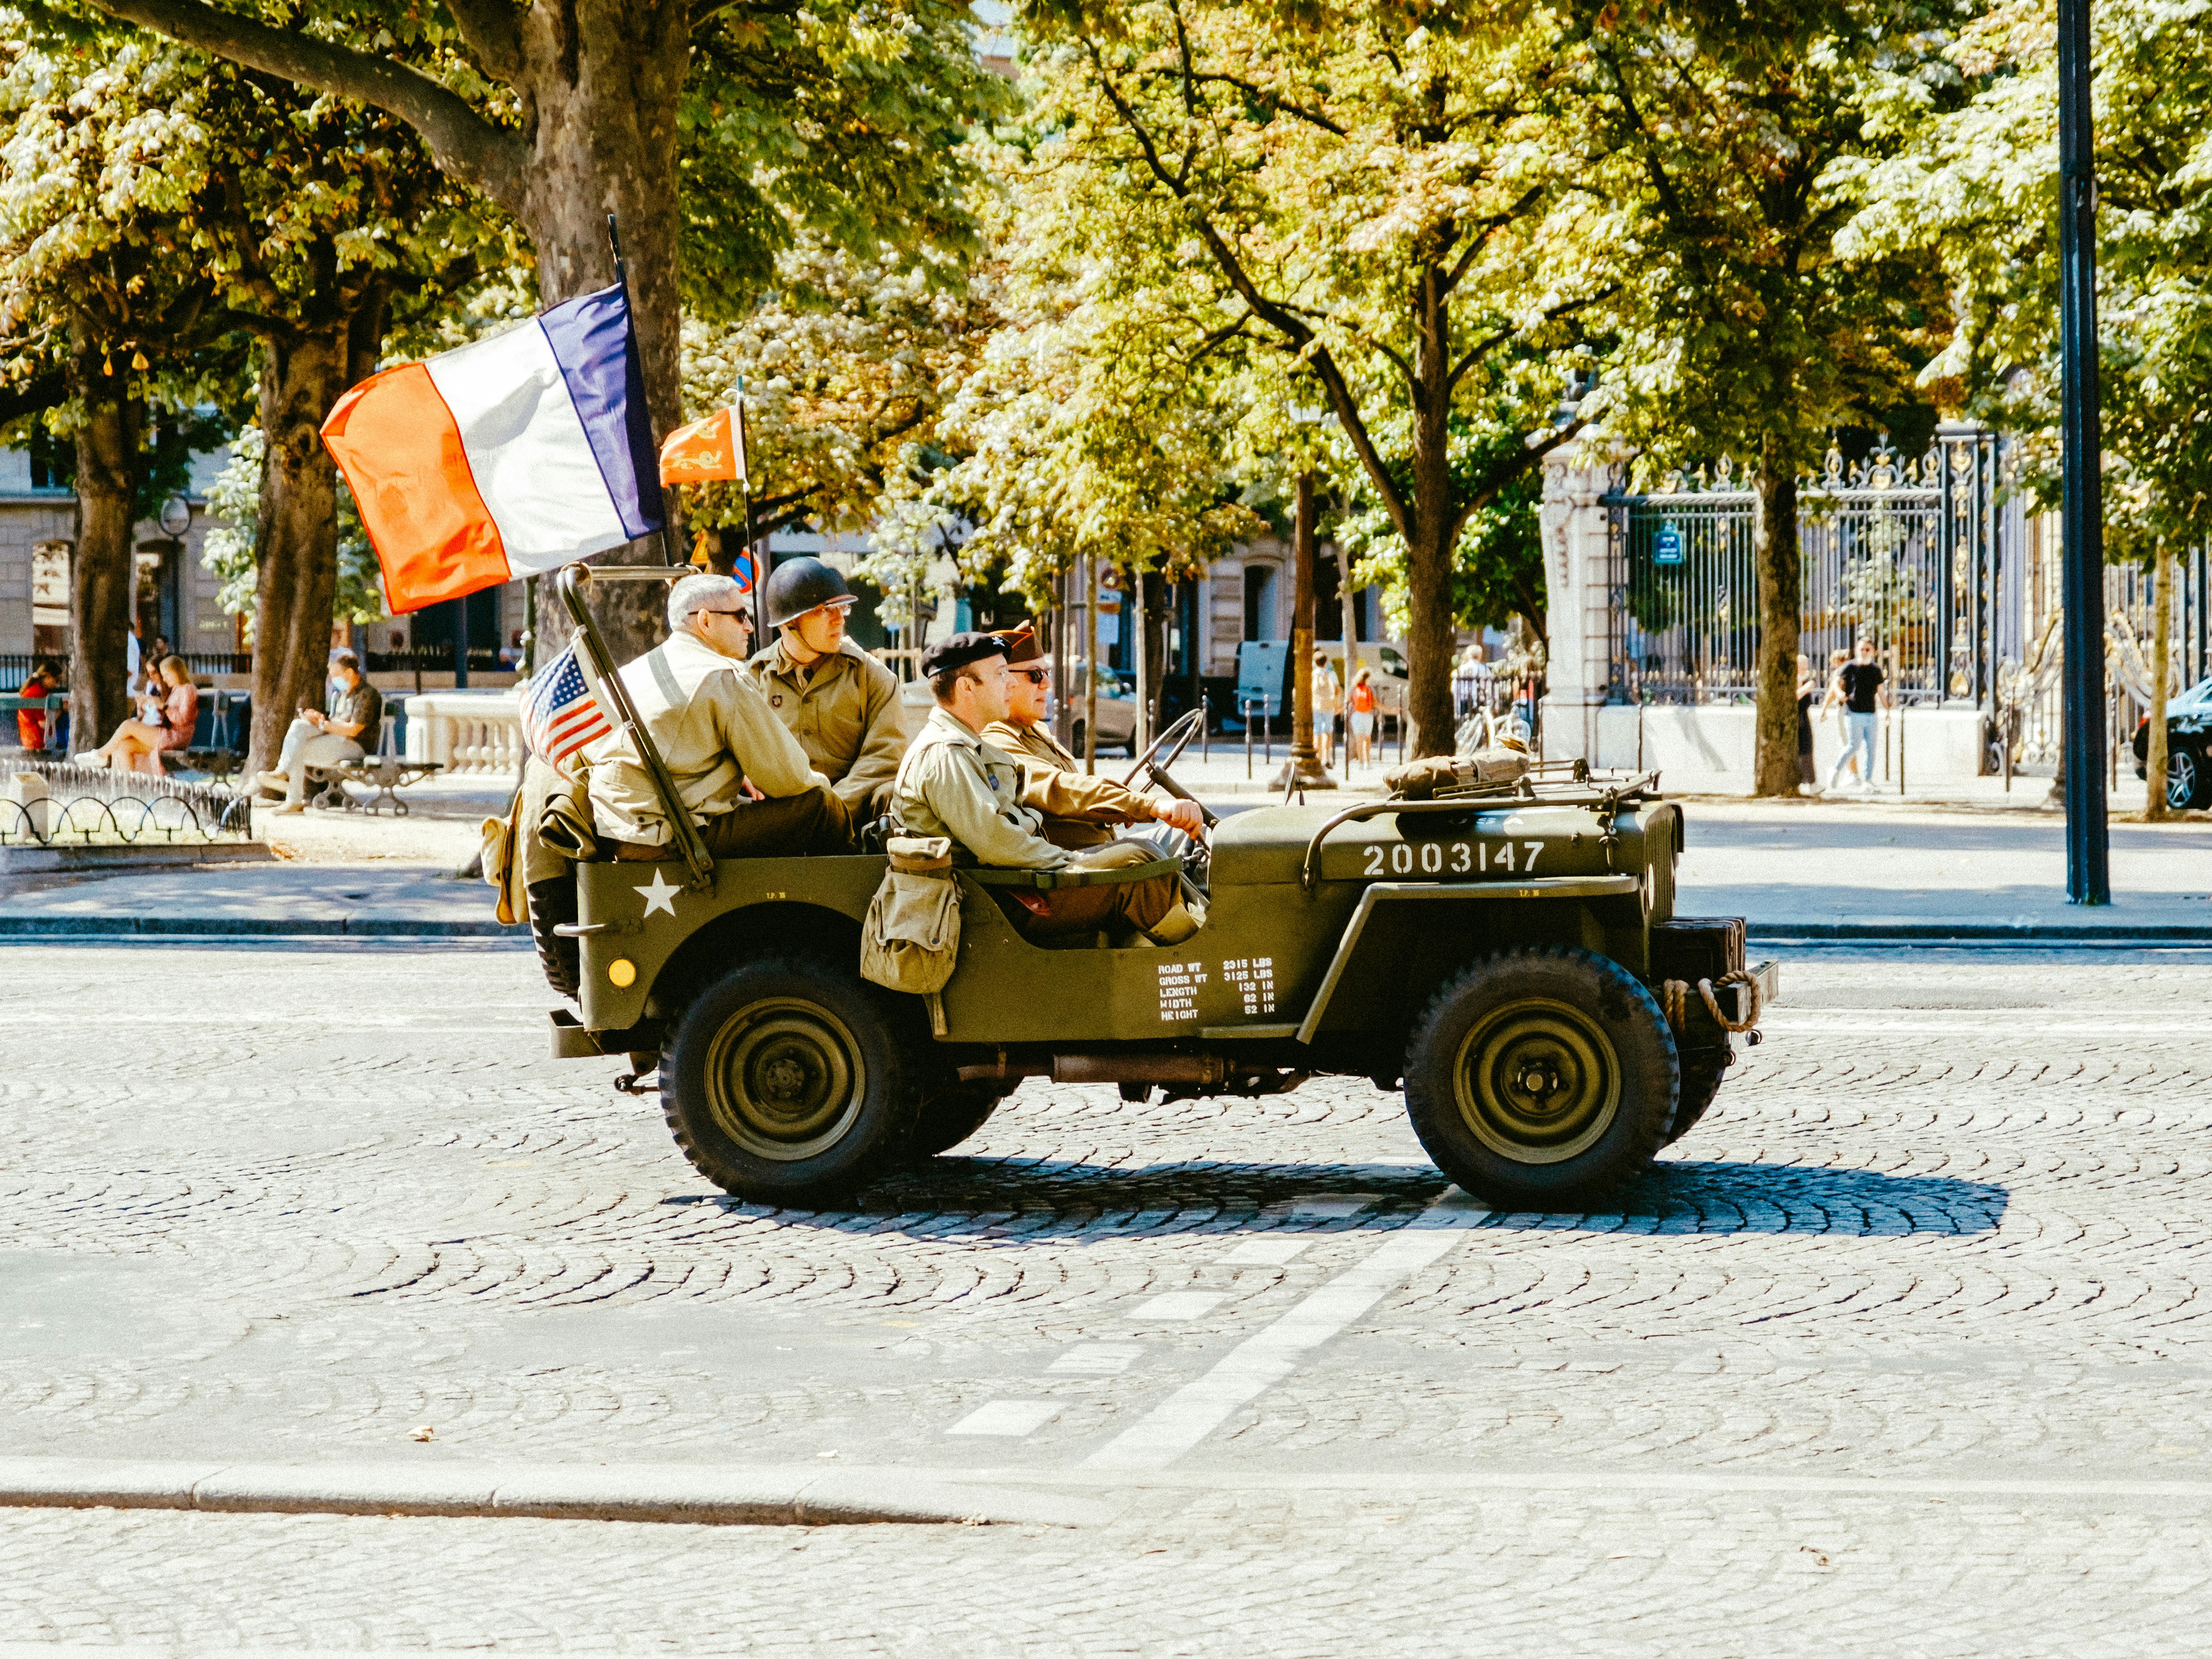 3 men riding on green and brown camouflage vehicle on road during daytime